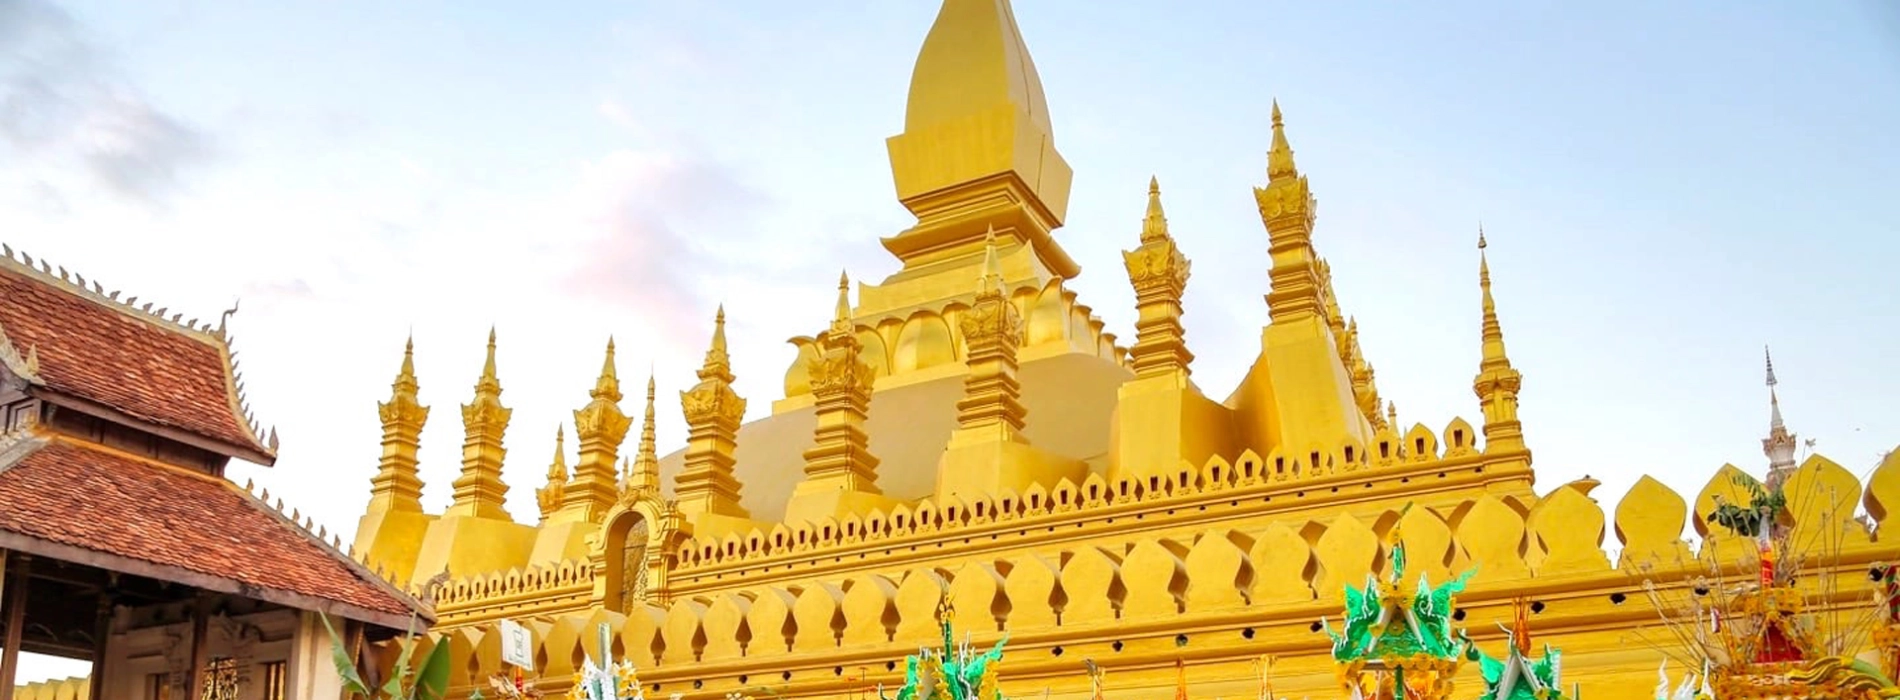 Top 5 best events and festivals in Laos